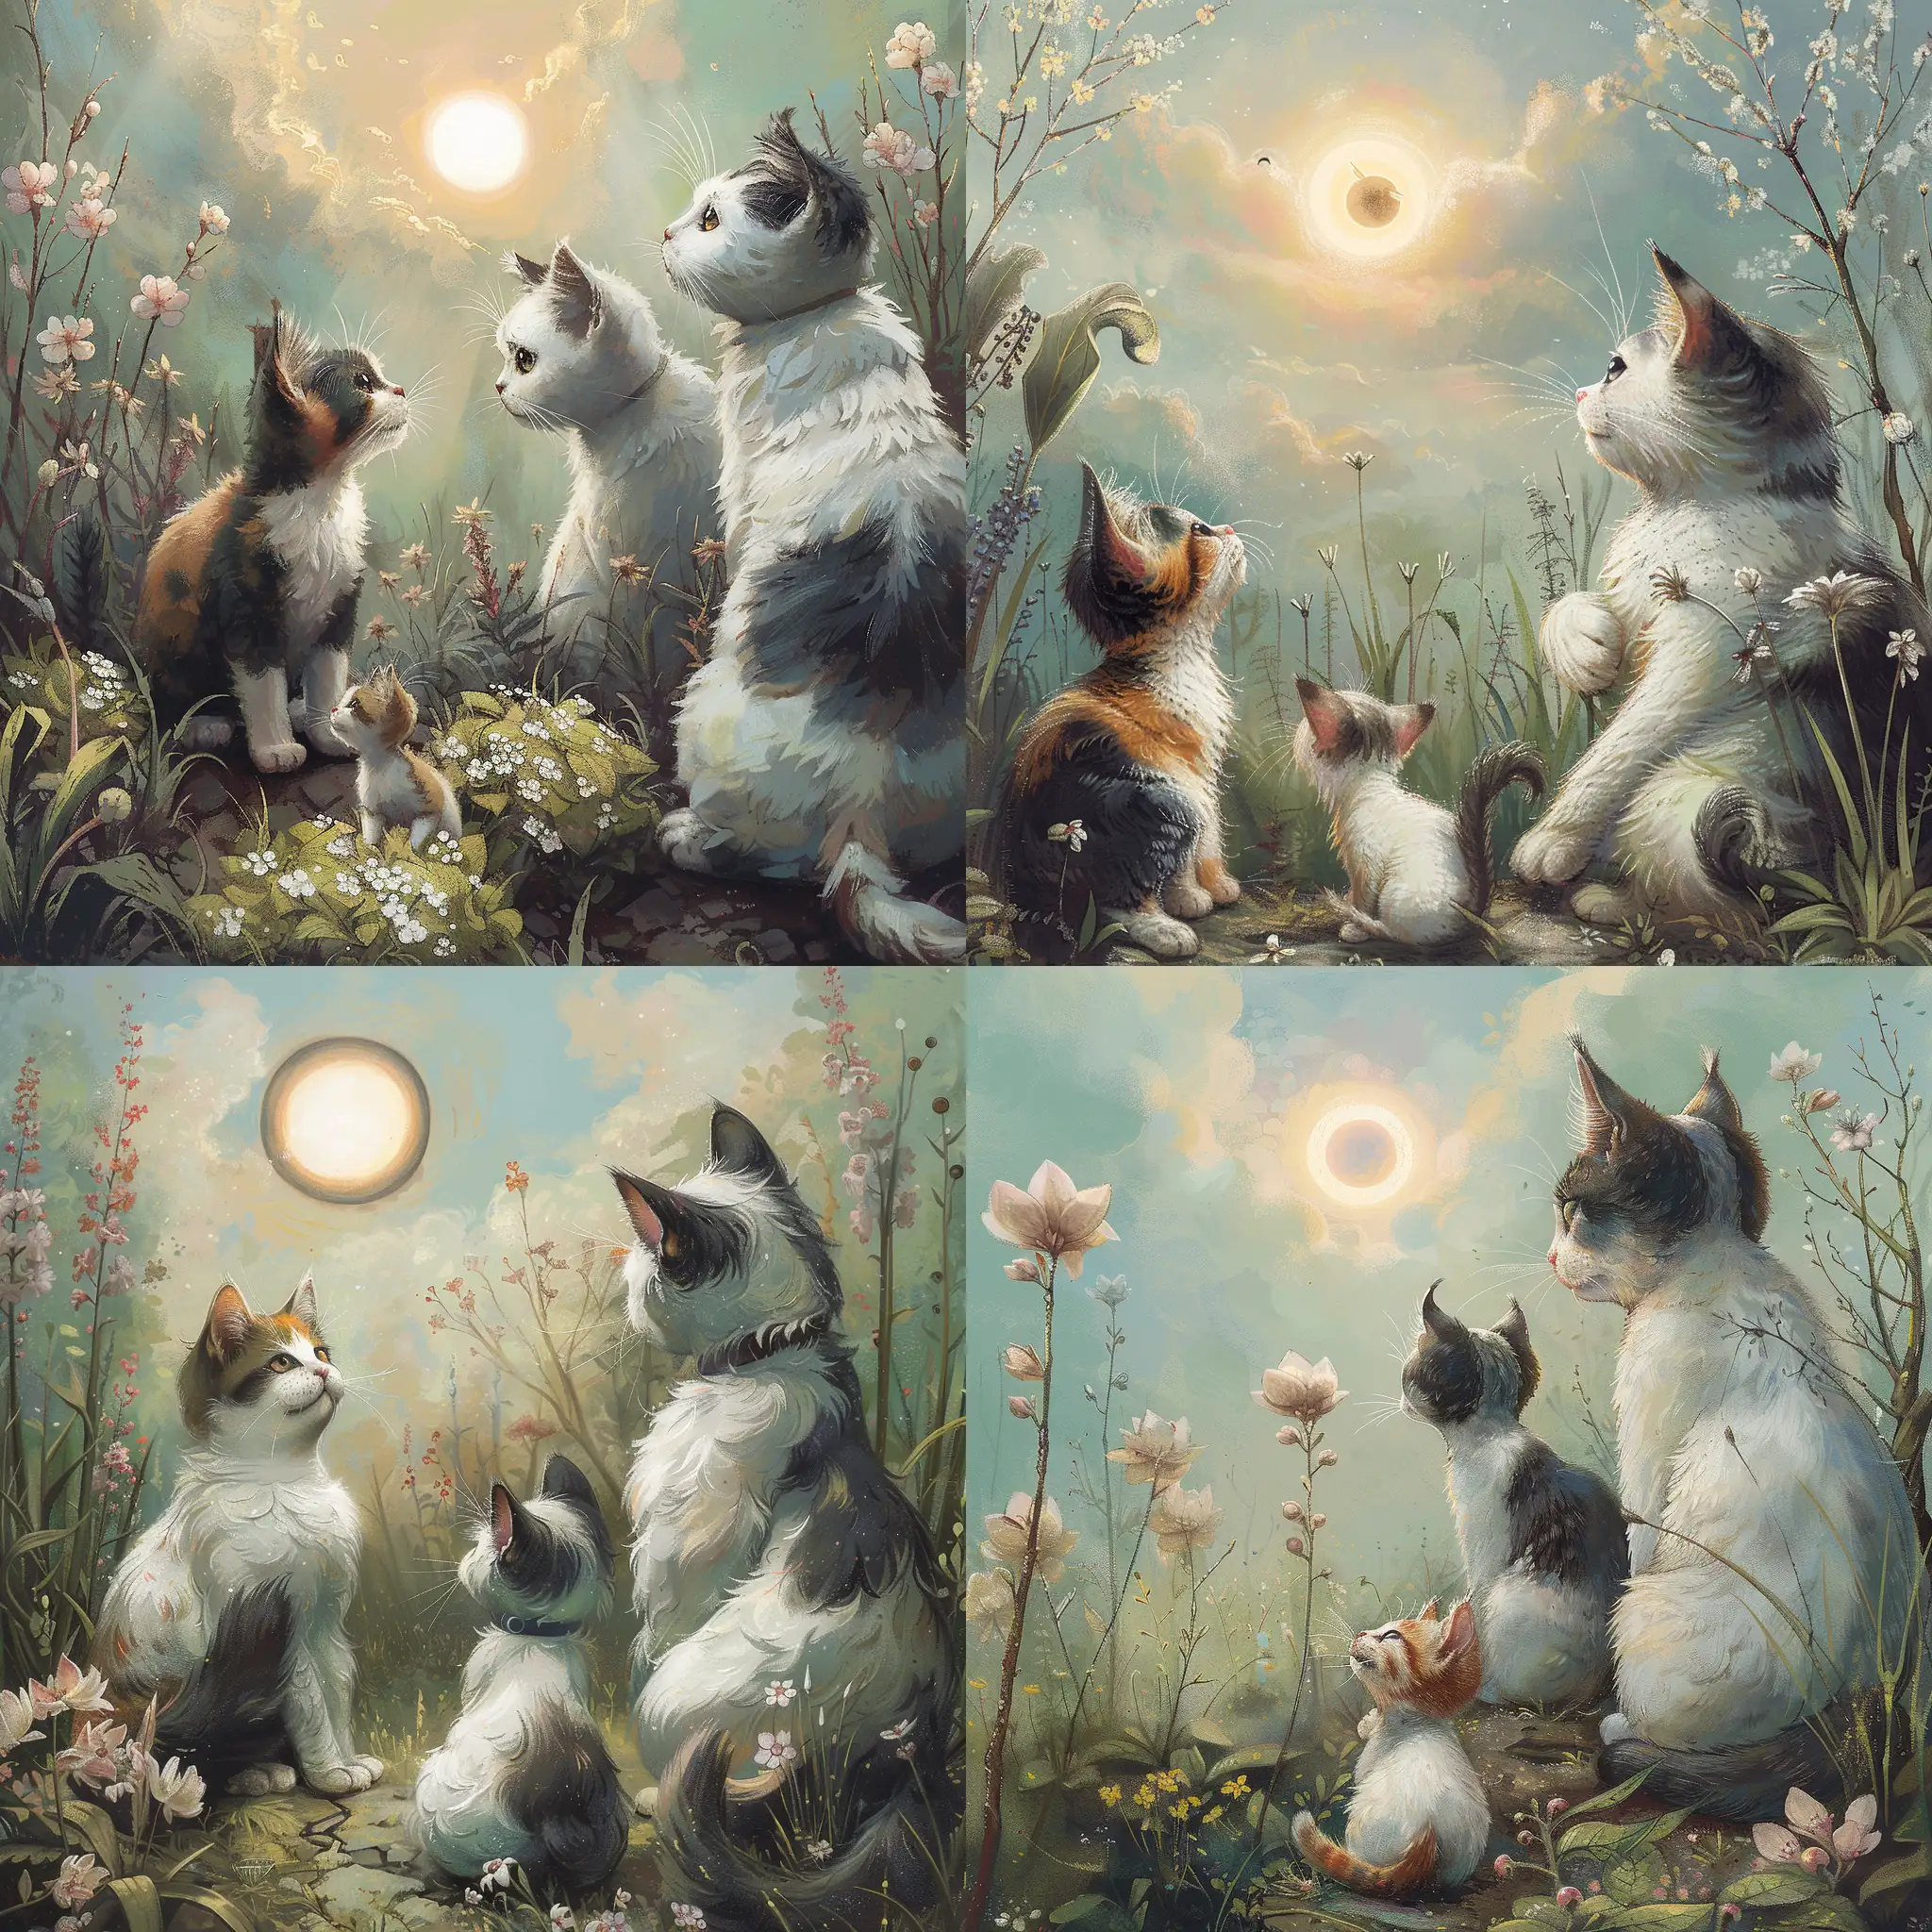 a small calico cat, and two big white cats with dark grey tails and ears. They are watching the total eclipse in a spring garden.
